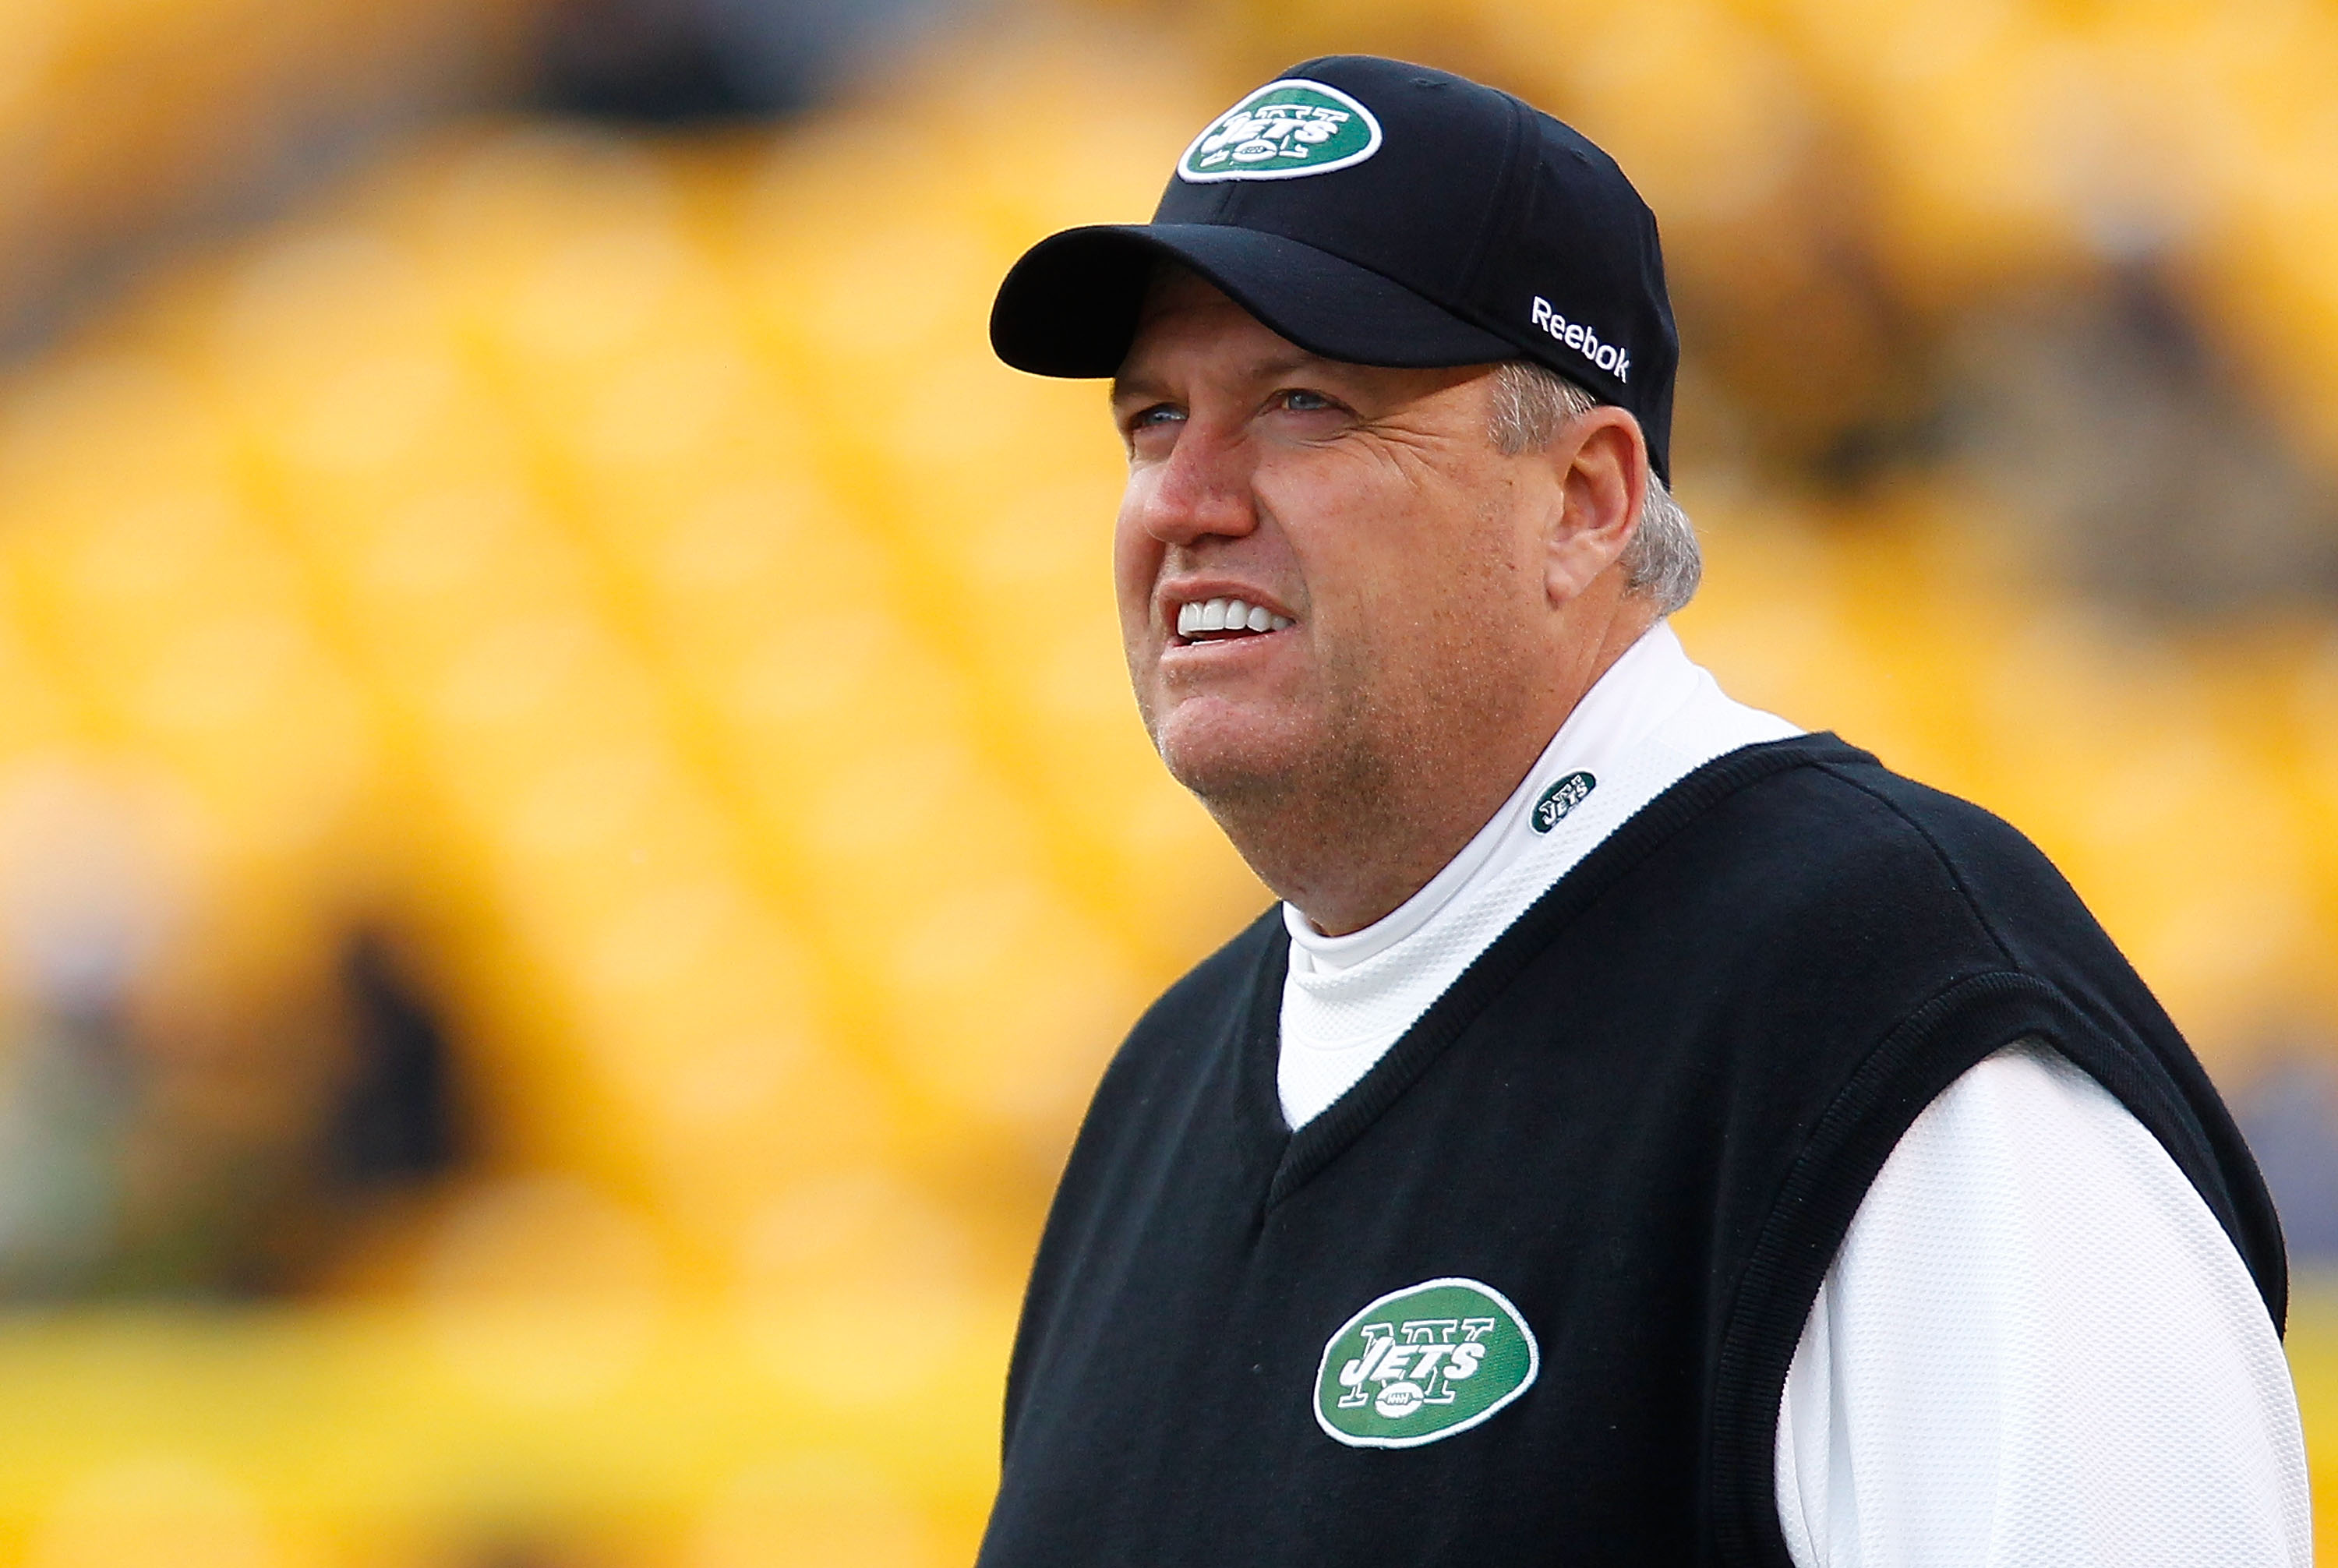 Rex Ryan Foot Fetish 10 Reasons This Makes Him All the More Likeable